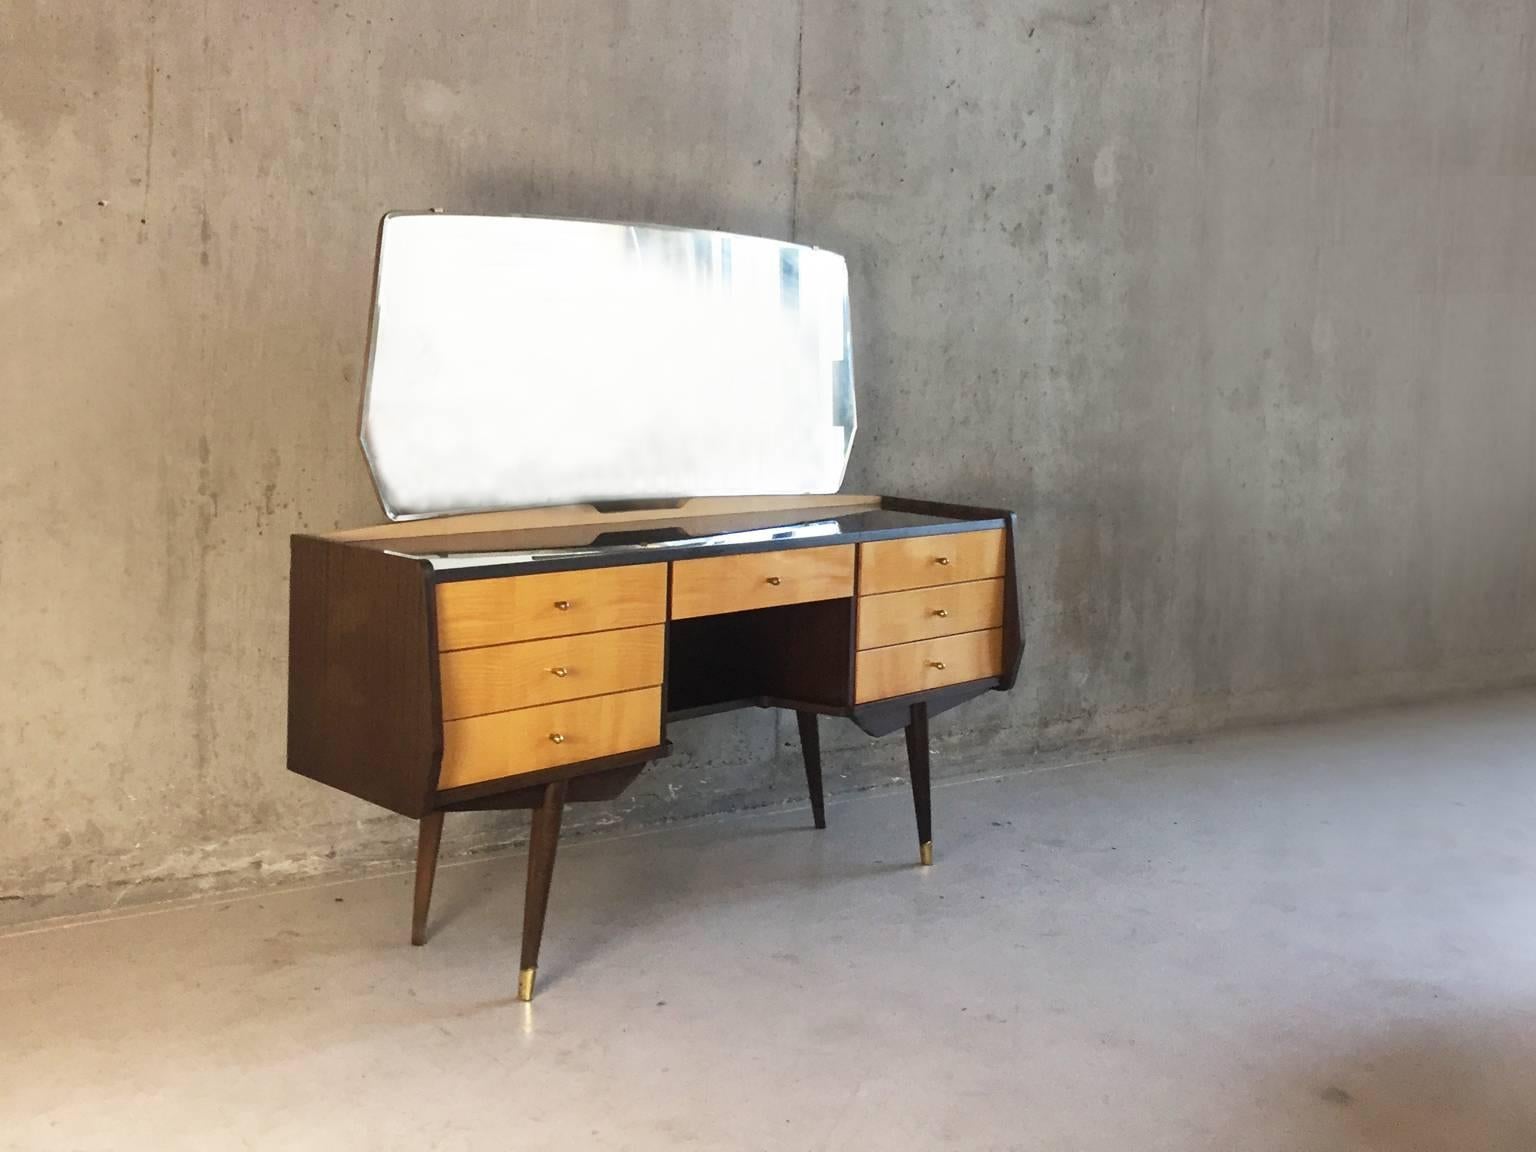 A great piece. A 1970s dressing table. The frame is stained beech, and to contrast the drawers are in light beech high gloss veneer. Delicate brass-plated handles and front feet caps. Topped with a large mirror held in place with small detailed